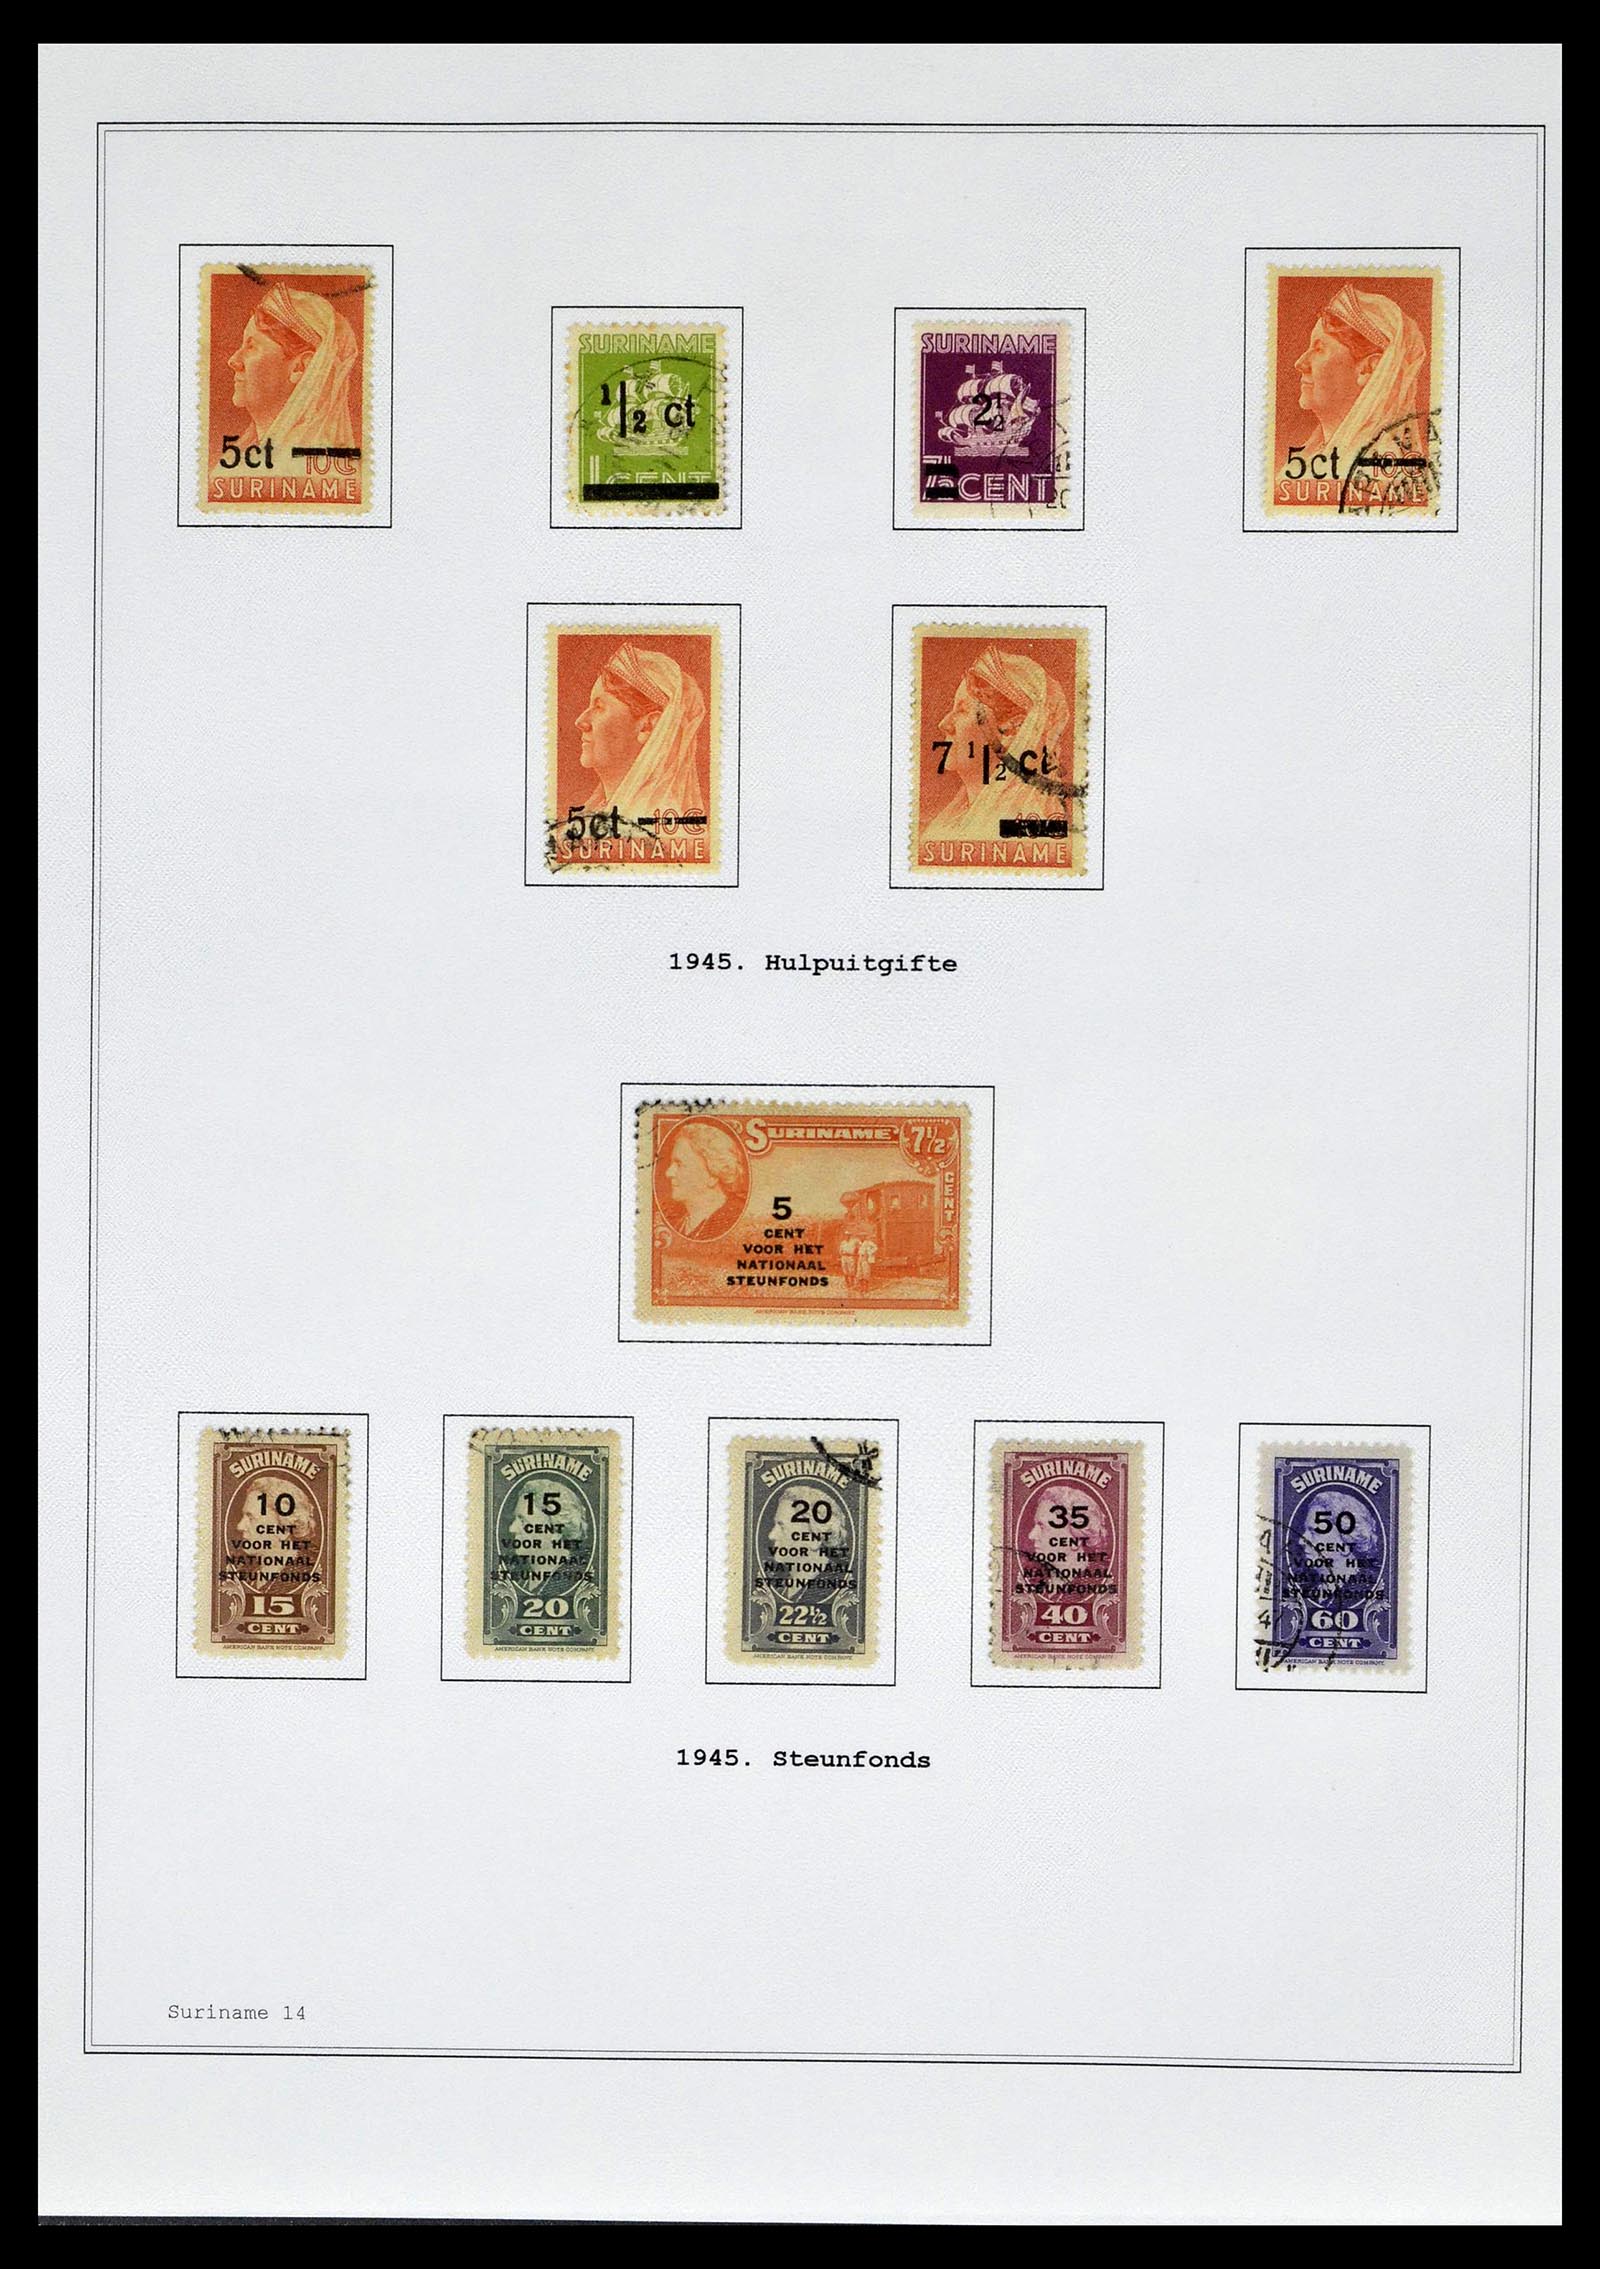 39026 0125 - Stamp collection 39026 Dutch east Indies and Suriname 1864-1975.